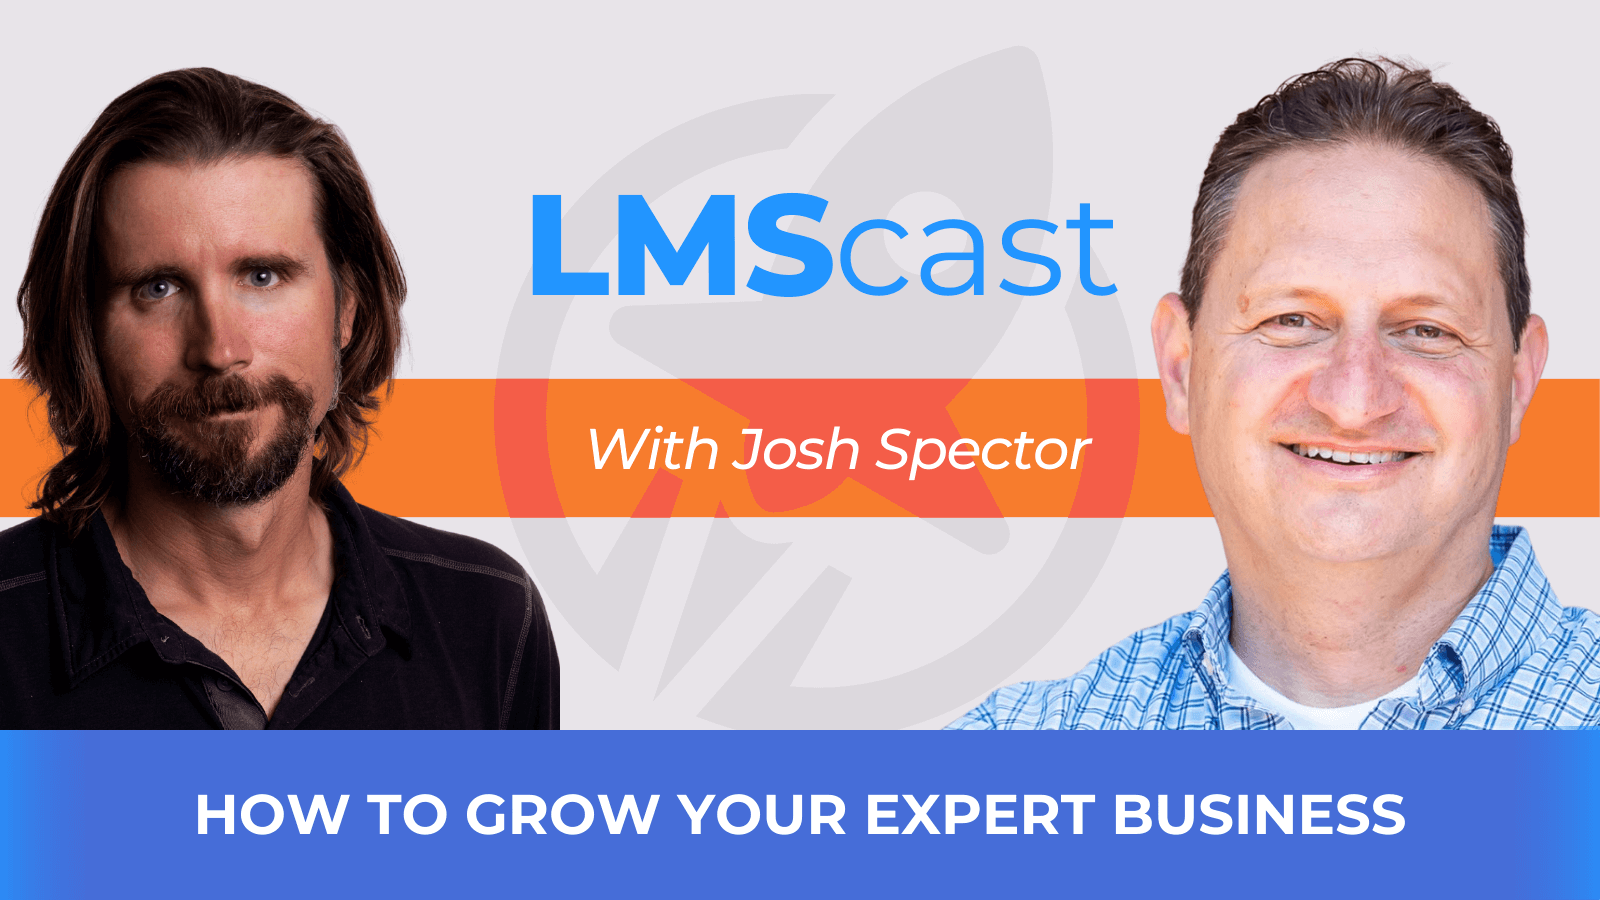 How to Grow Your Expert Business with Josh Spector